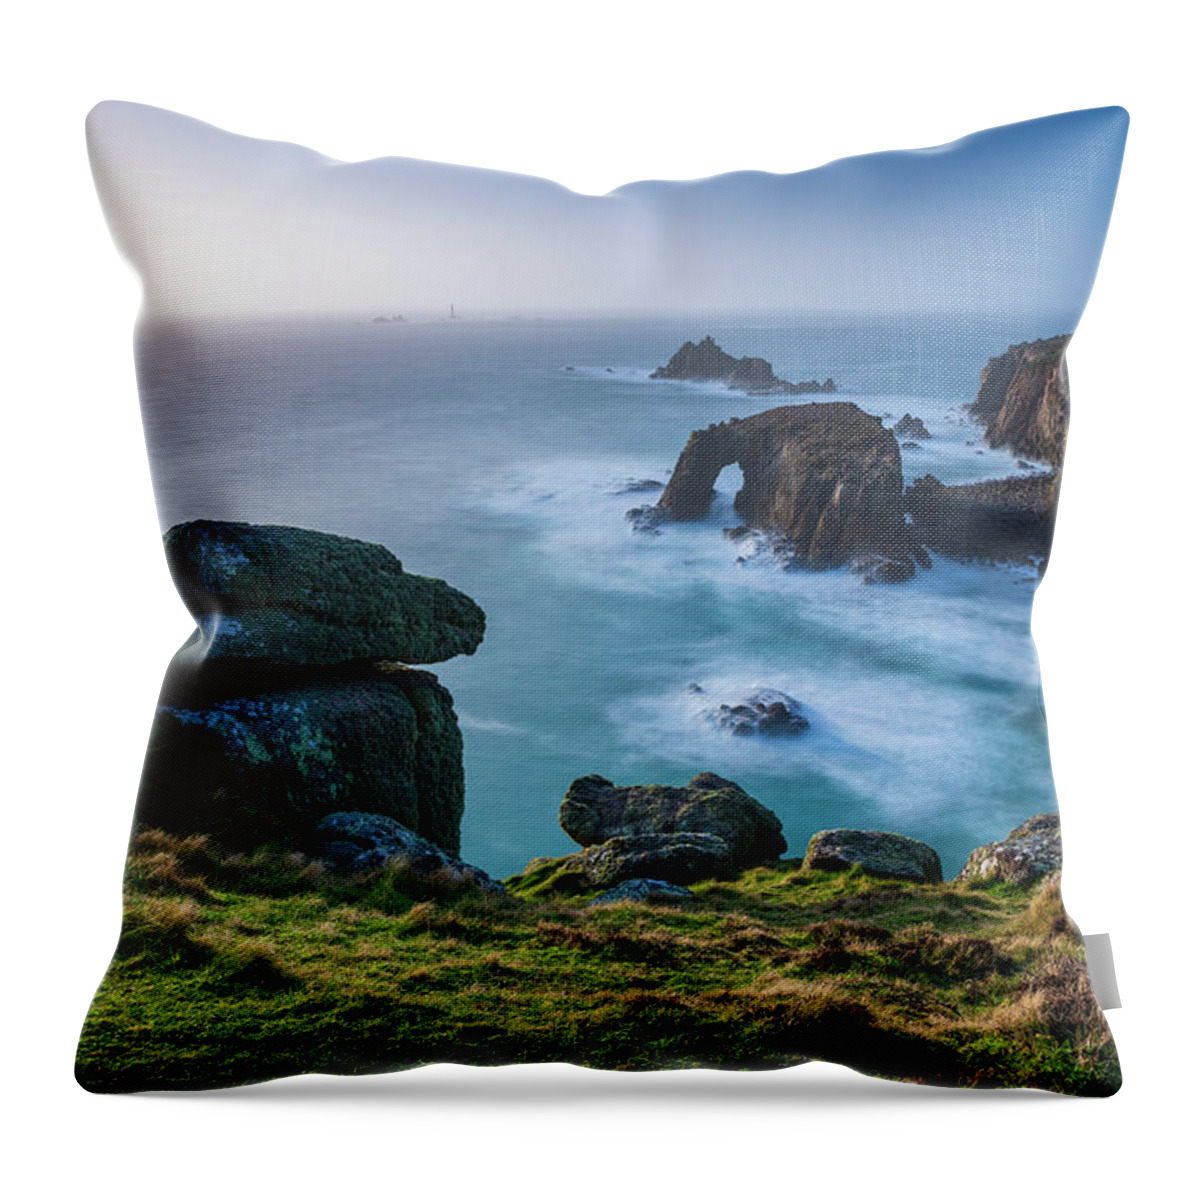 Estock Throw Pillow featuring the digital art United Kingdom, England, Cornwall, Great Britain, Atlantic Ocean, British Isles, Penwith Peninsula, Enys Dodnan Arched Rock And The Armed Knight Rock In Distance Seen From Pordenack Point, Land's End by Sebastian Wasek